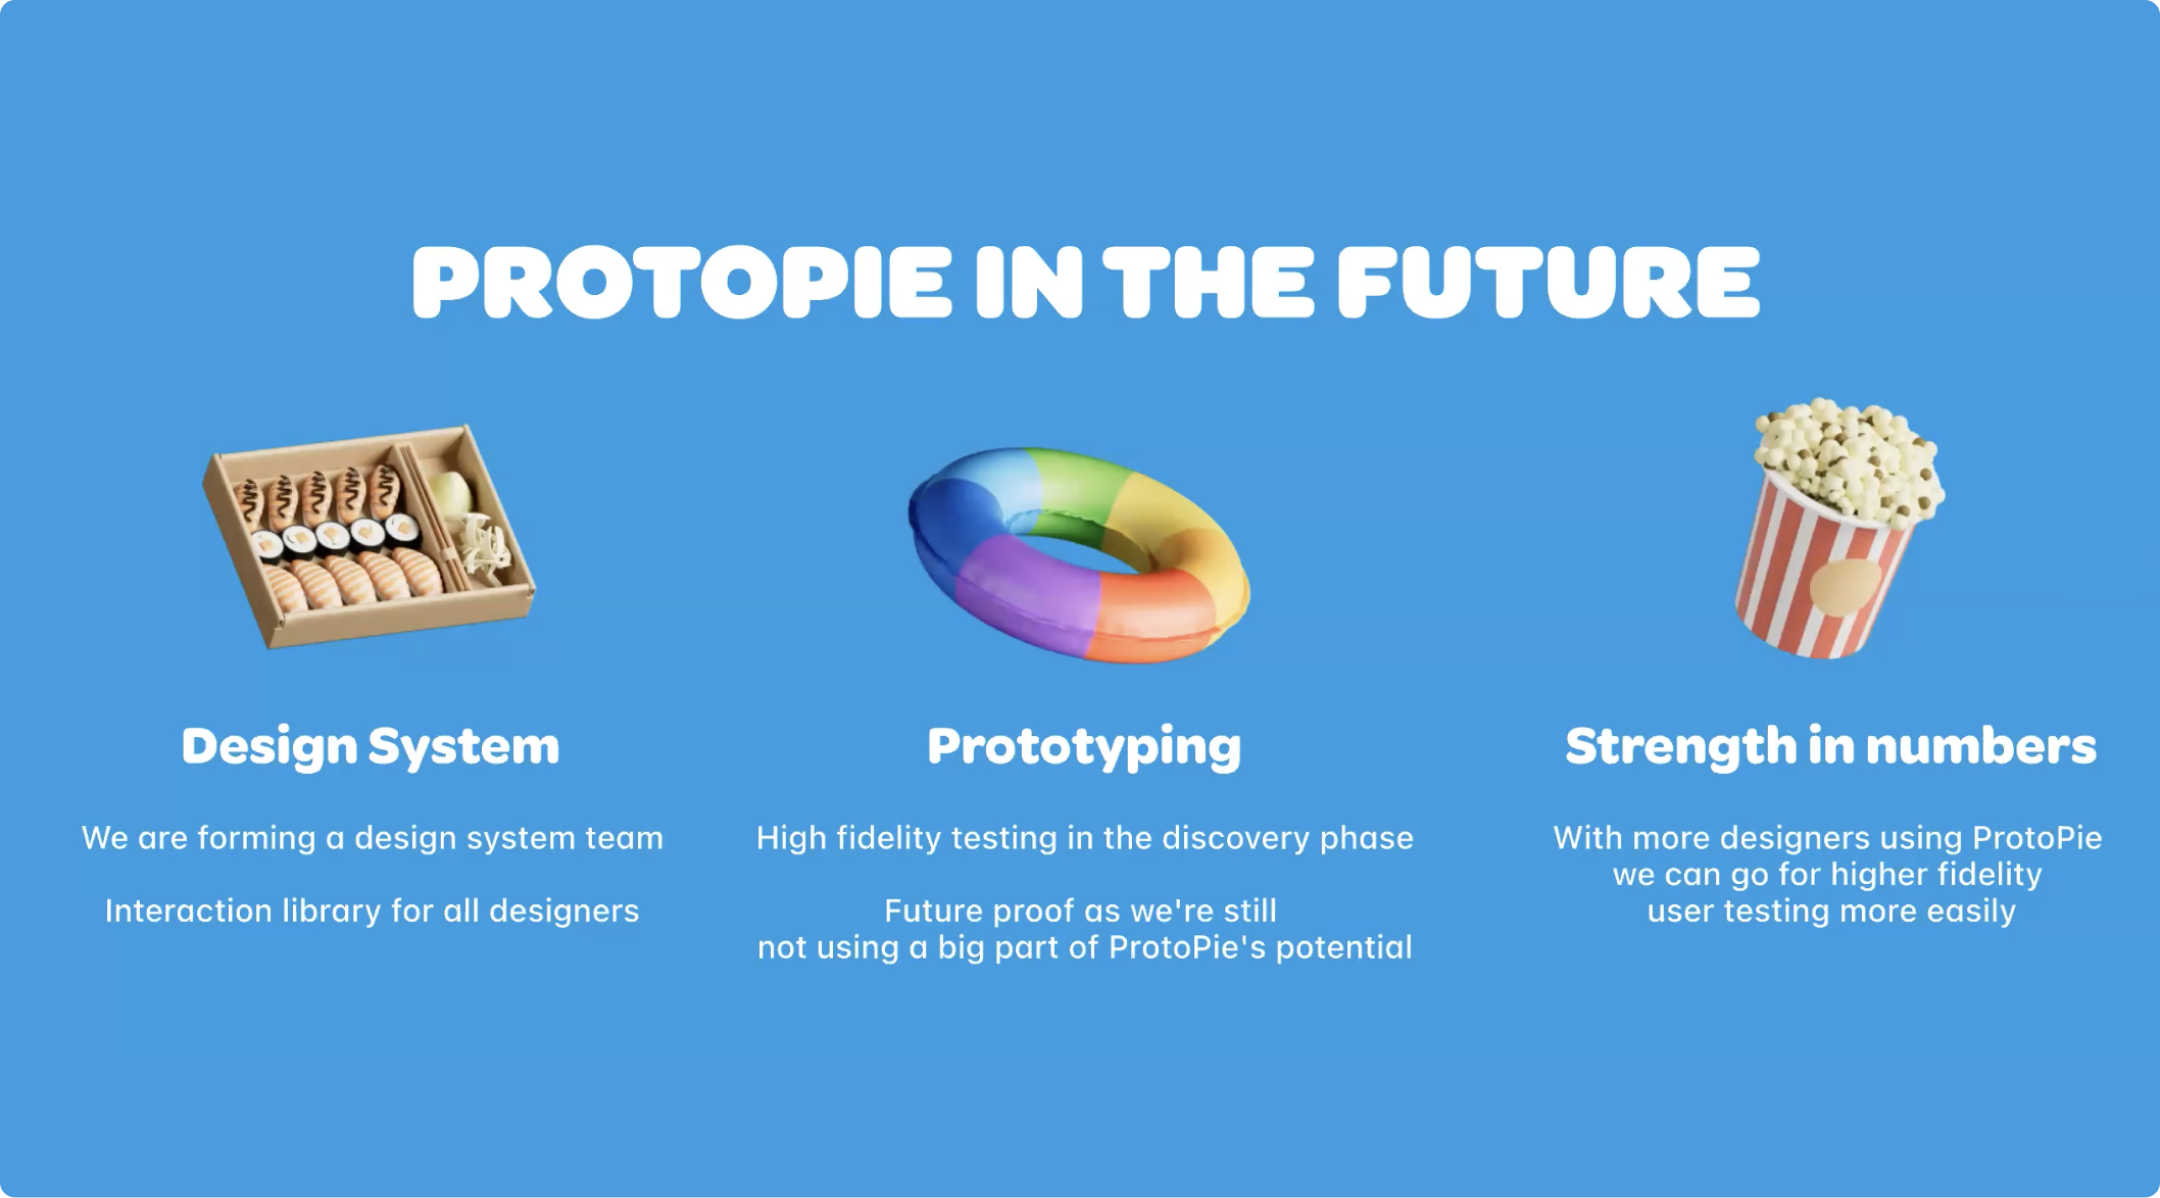 How Wolt plans to use ProtoPie in the future.